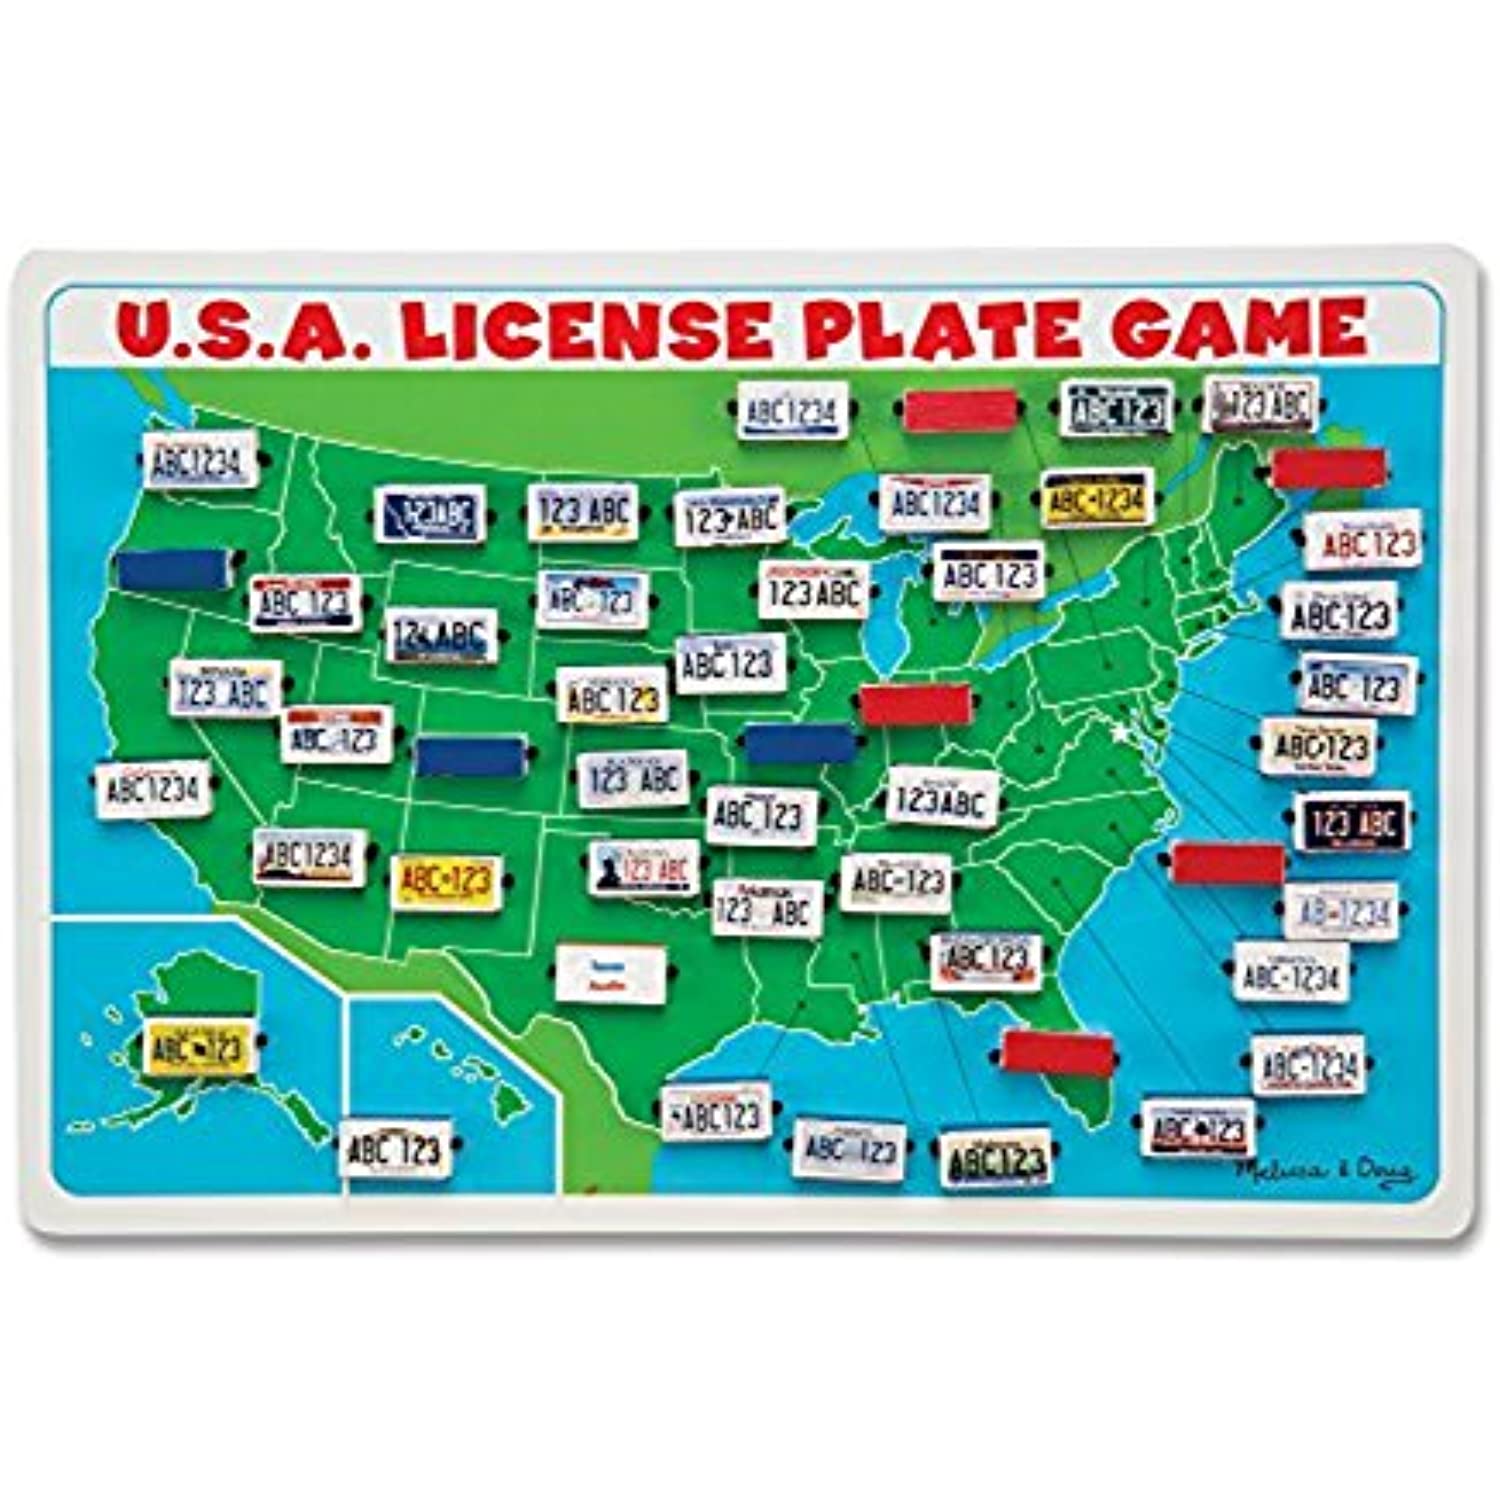 Melissa & Doug Bundle Includes 2 Items Flip to Win Travel License Plate Game - Wooden U.S. Map Game Board USA Map Floor Puzzle (51 pcs, 2 x 3 feet)